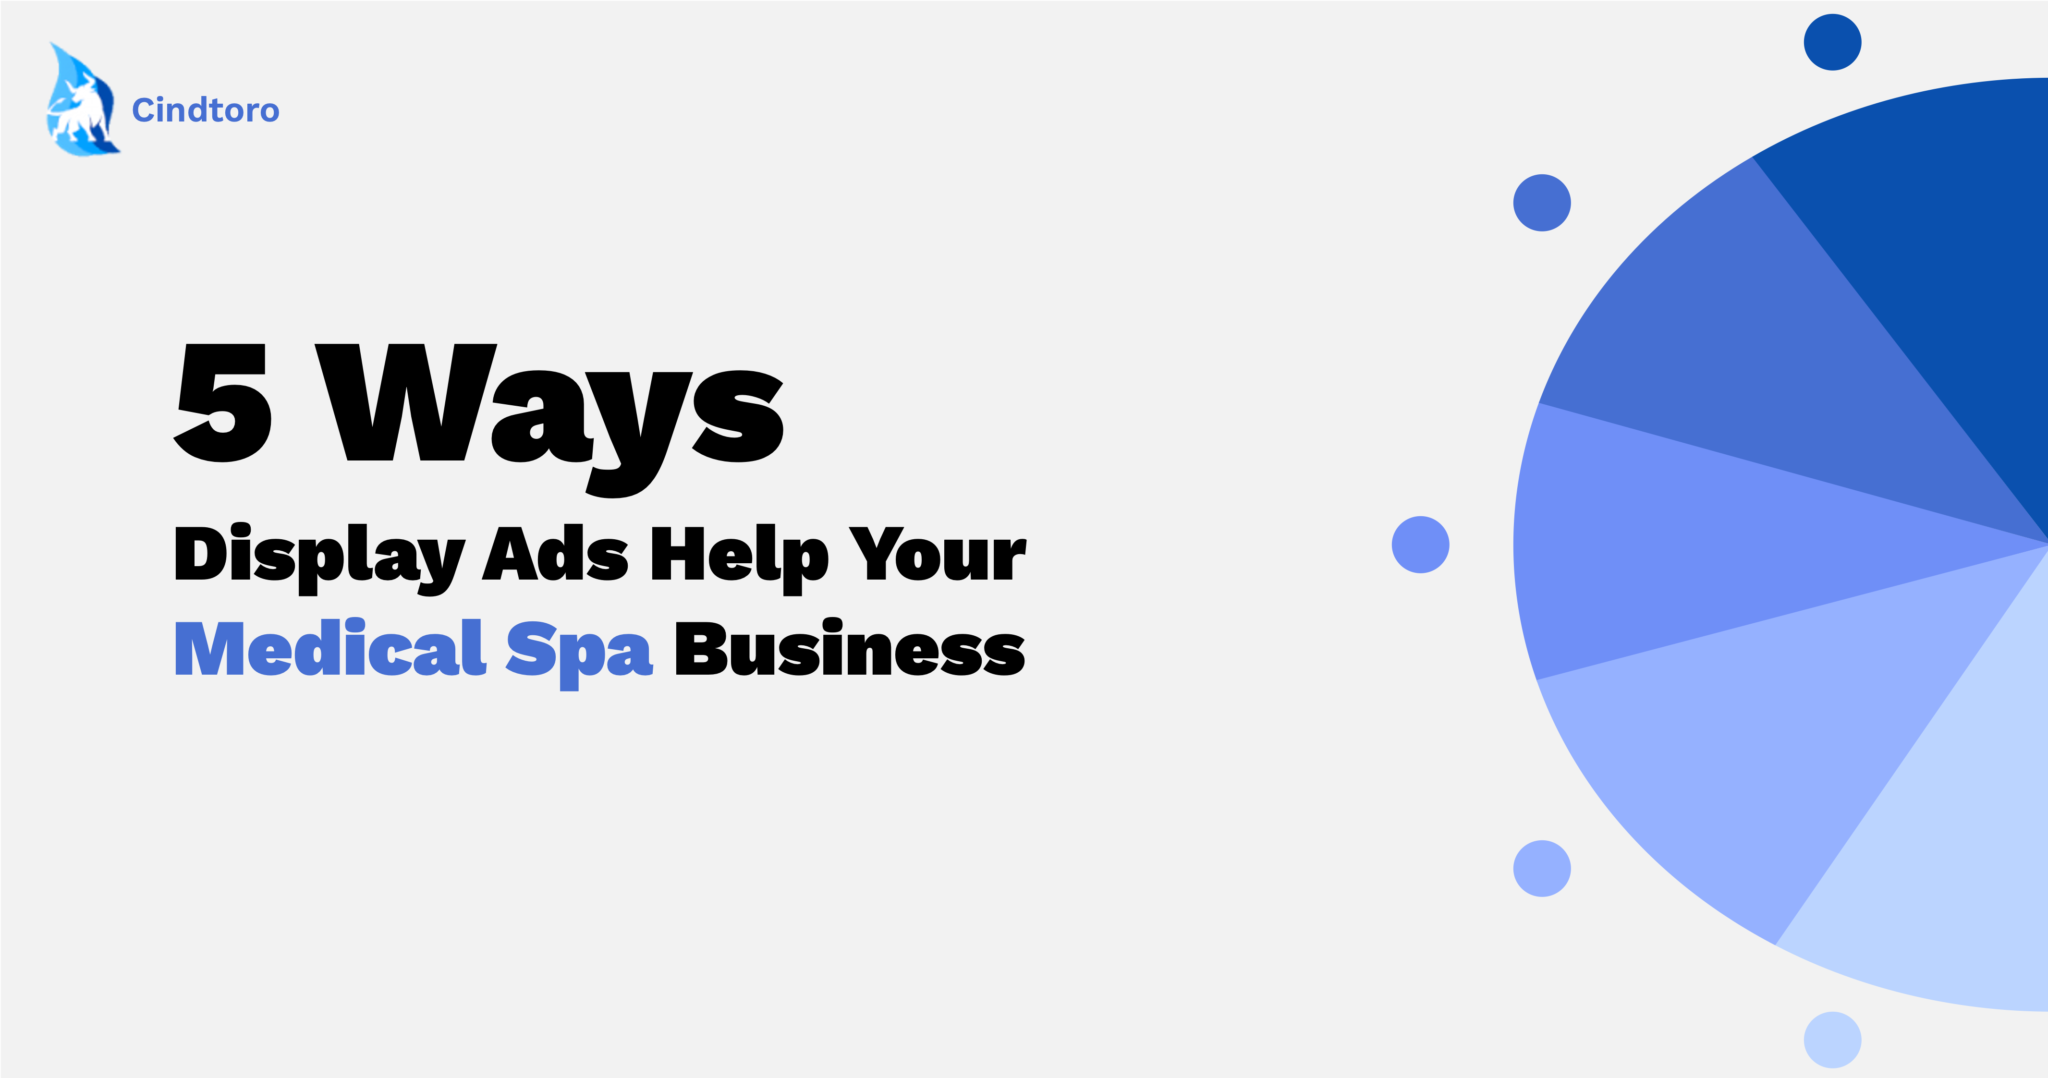 5 Ways Display Ads Help Your Medical Spa Business